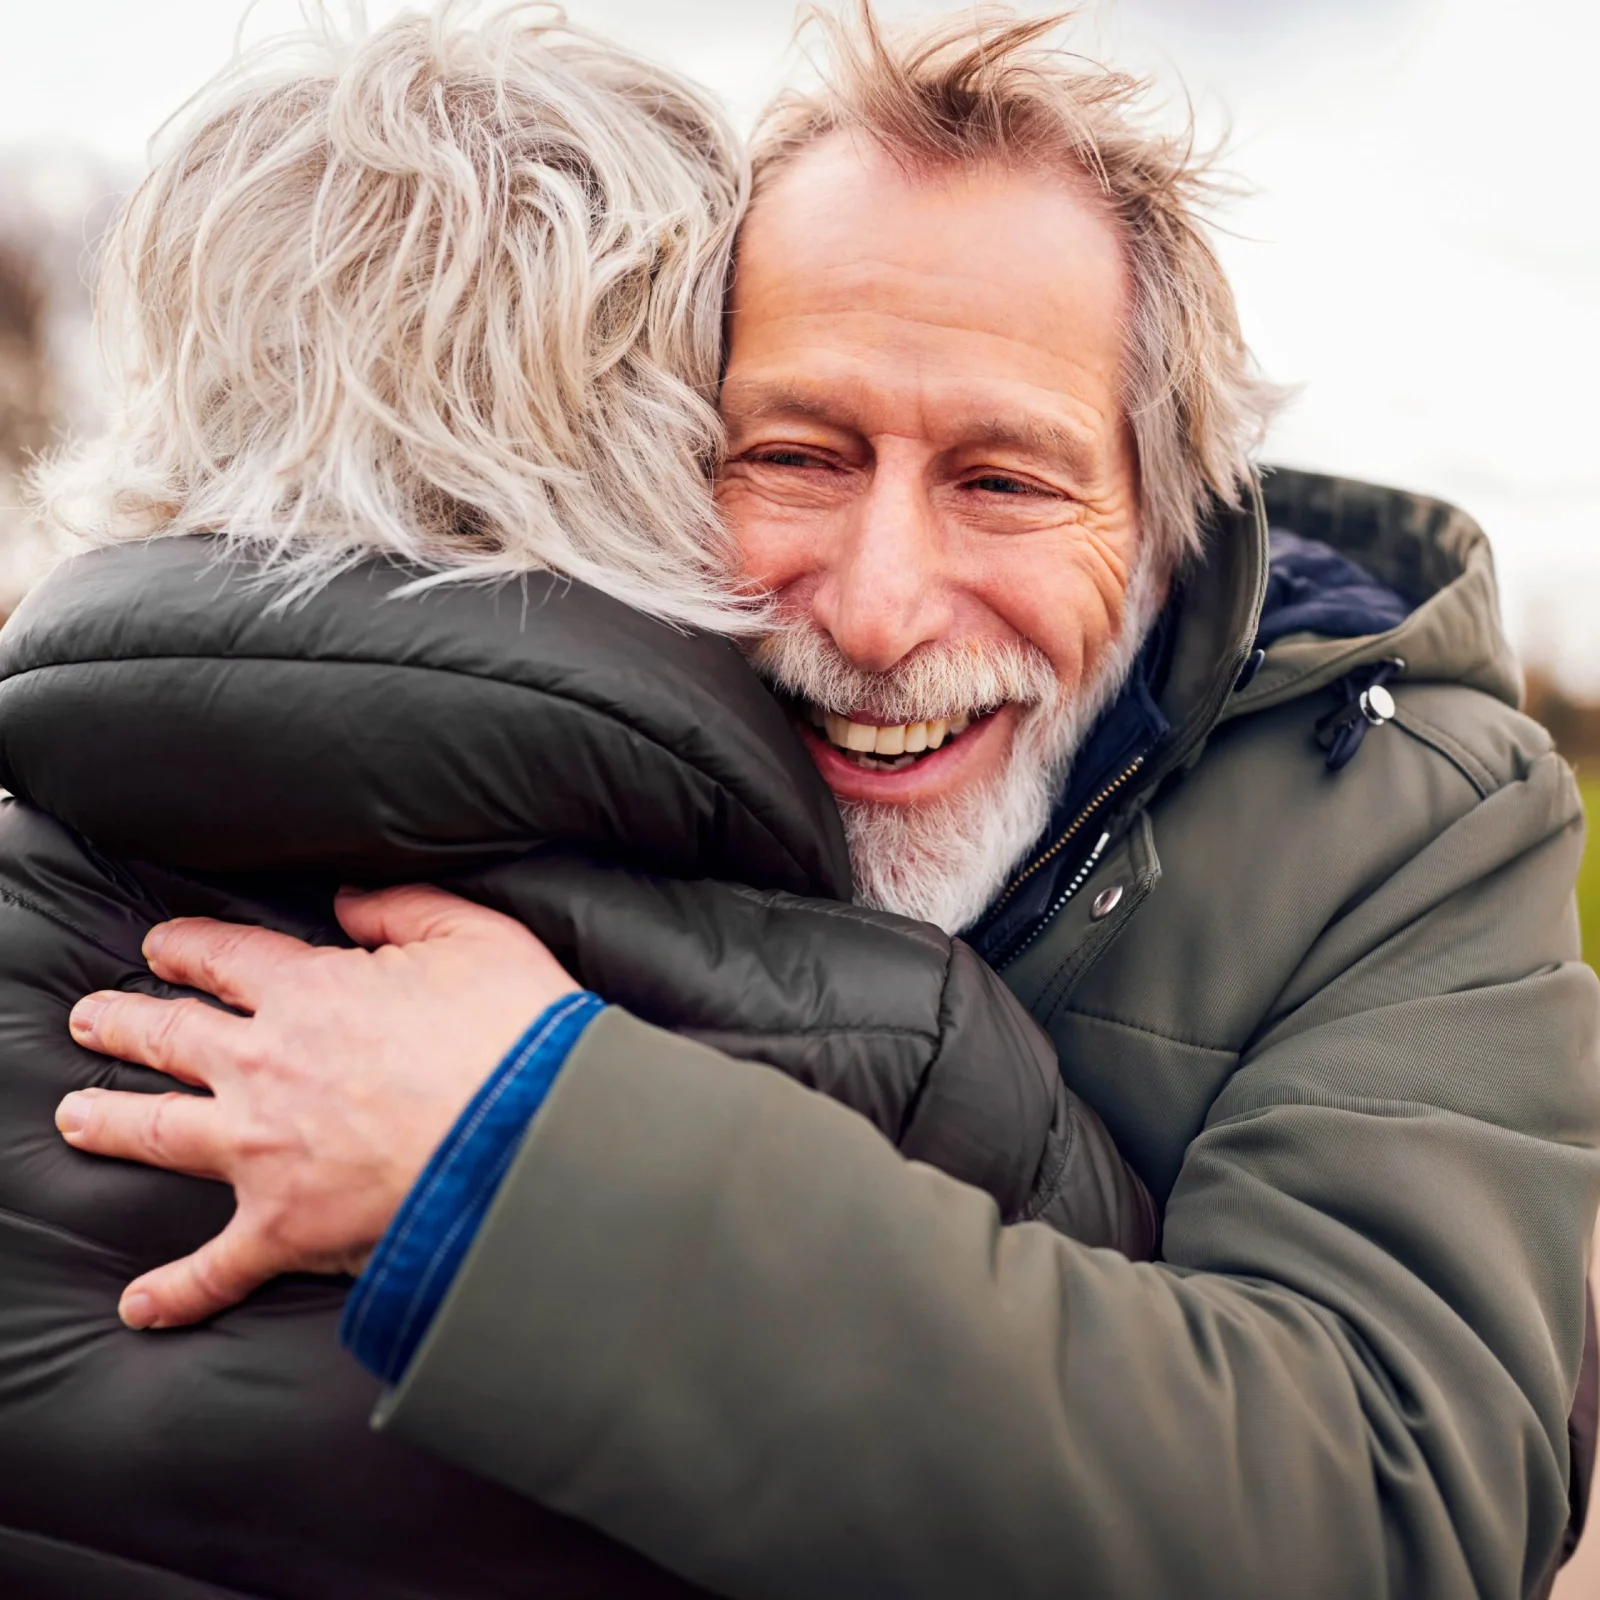 An elderly man with a joyful expression hugs another person, whose face is hidden. They are both wearing heavy winter jackets designed by a top design agency in Bristol. The background is blurred with soft natural light